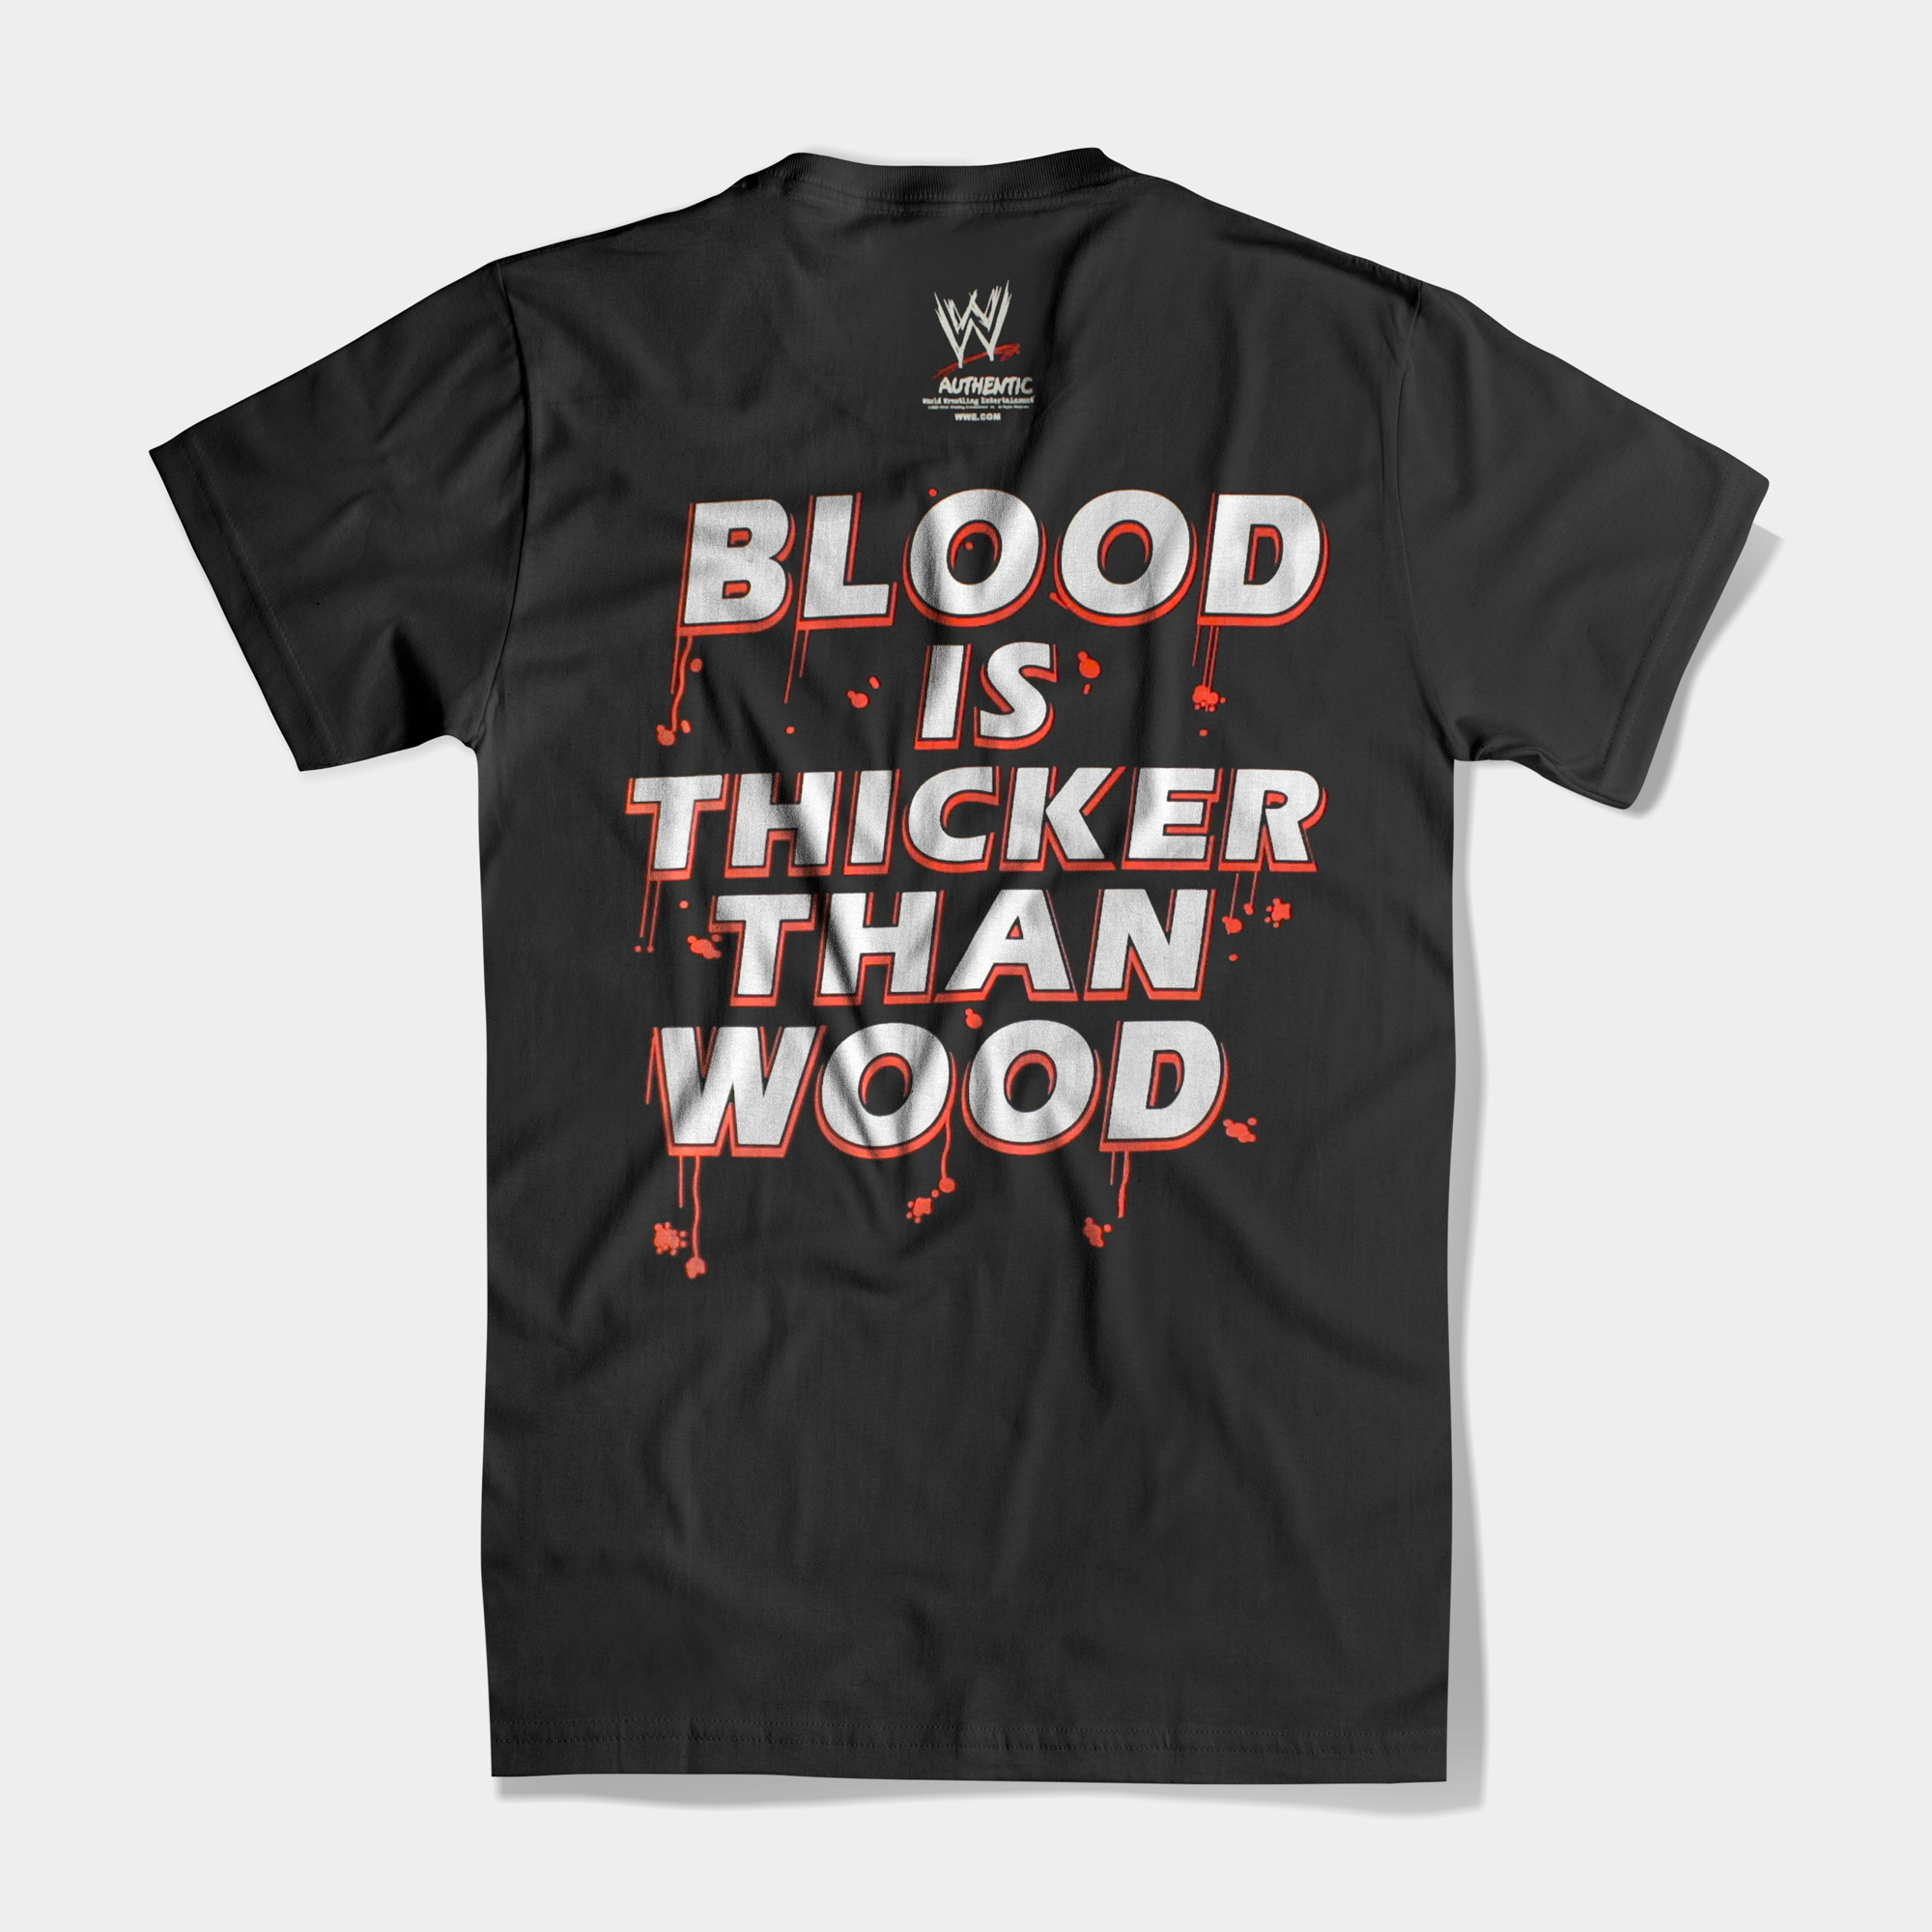 The Dudley Boyz' t-shirt with the iconic catchphrase, "Blood is Thicker Than Wood."